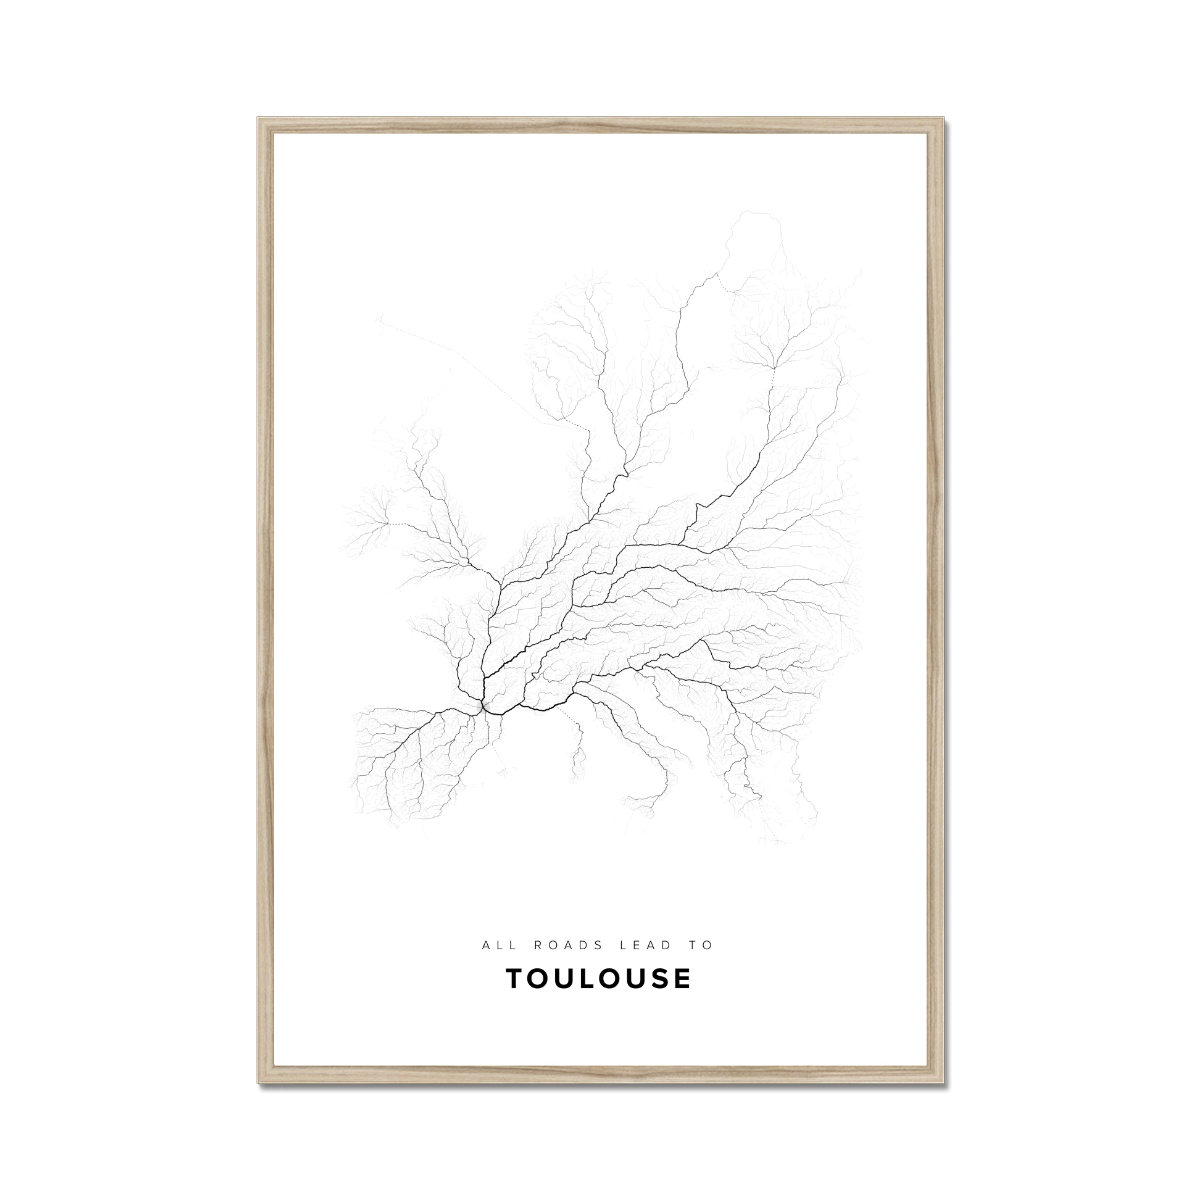 All roads lead to Toulouse (France) Fine Art Map Print